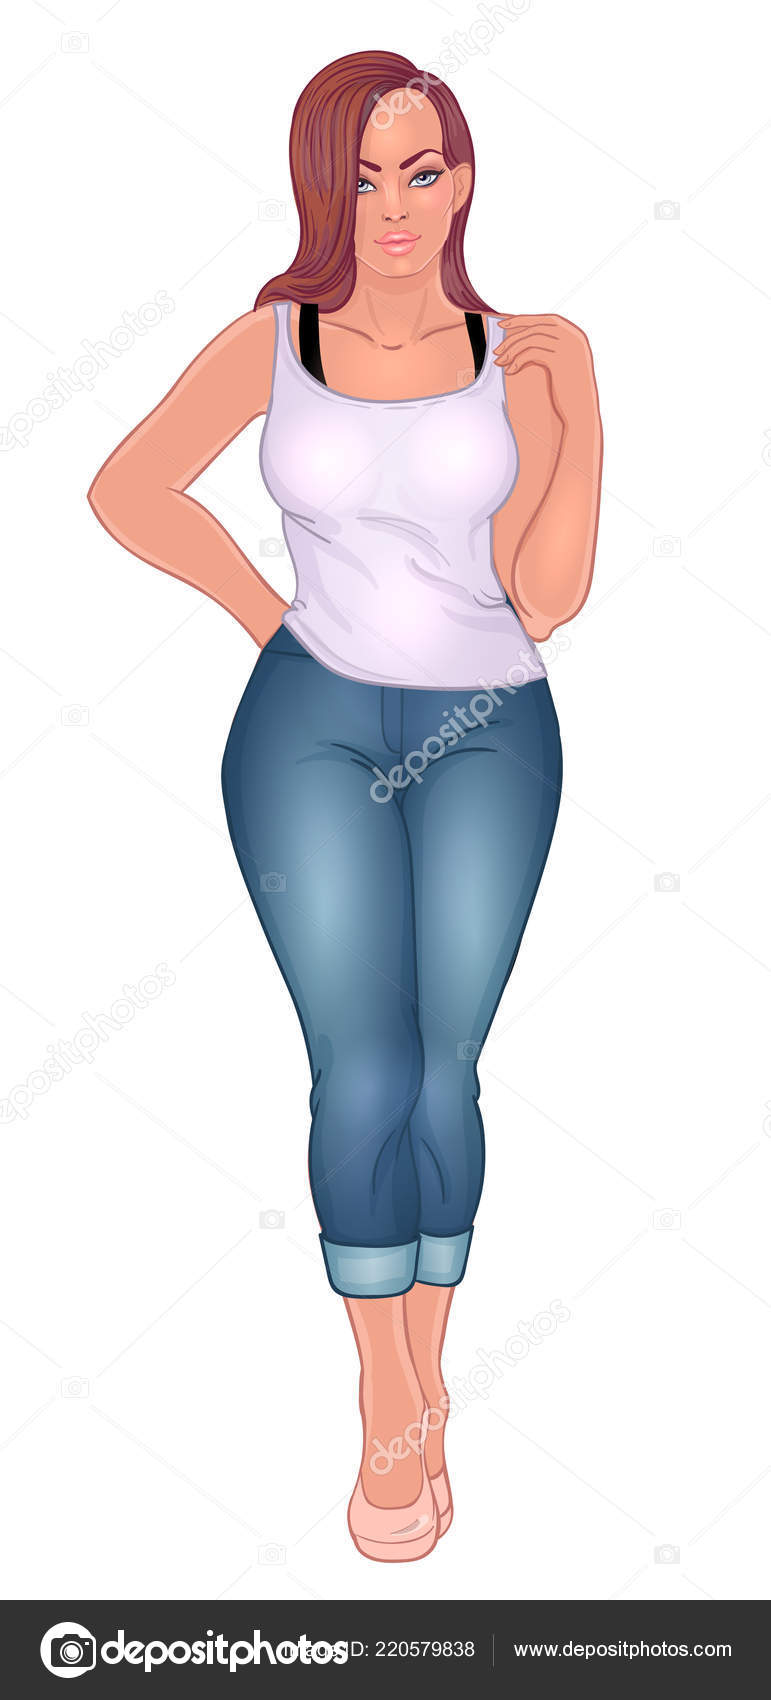 Curvy Fashion Stock Photos and Images - 123RF